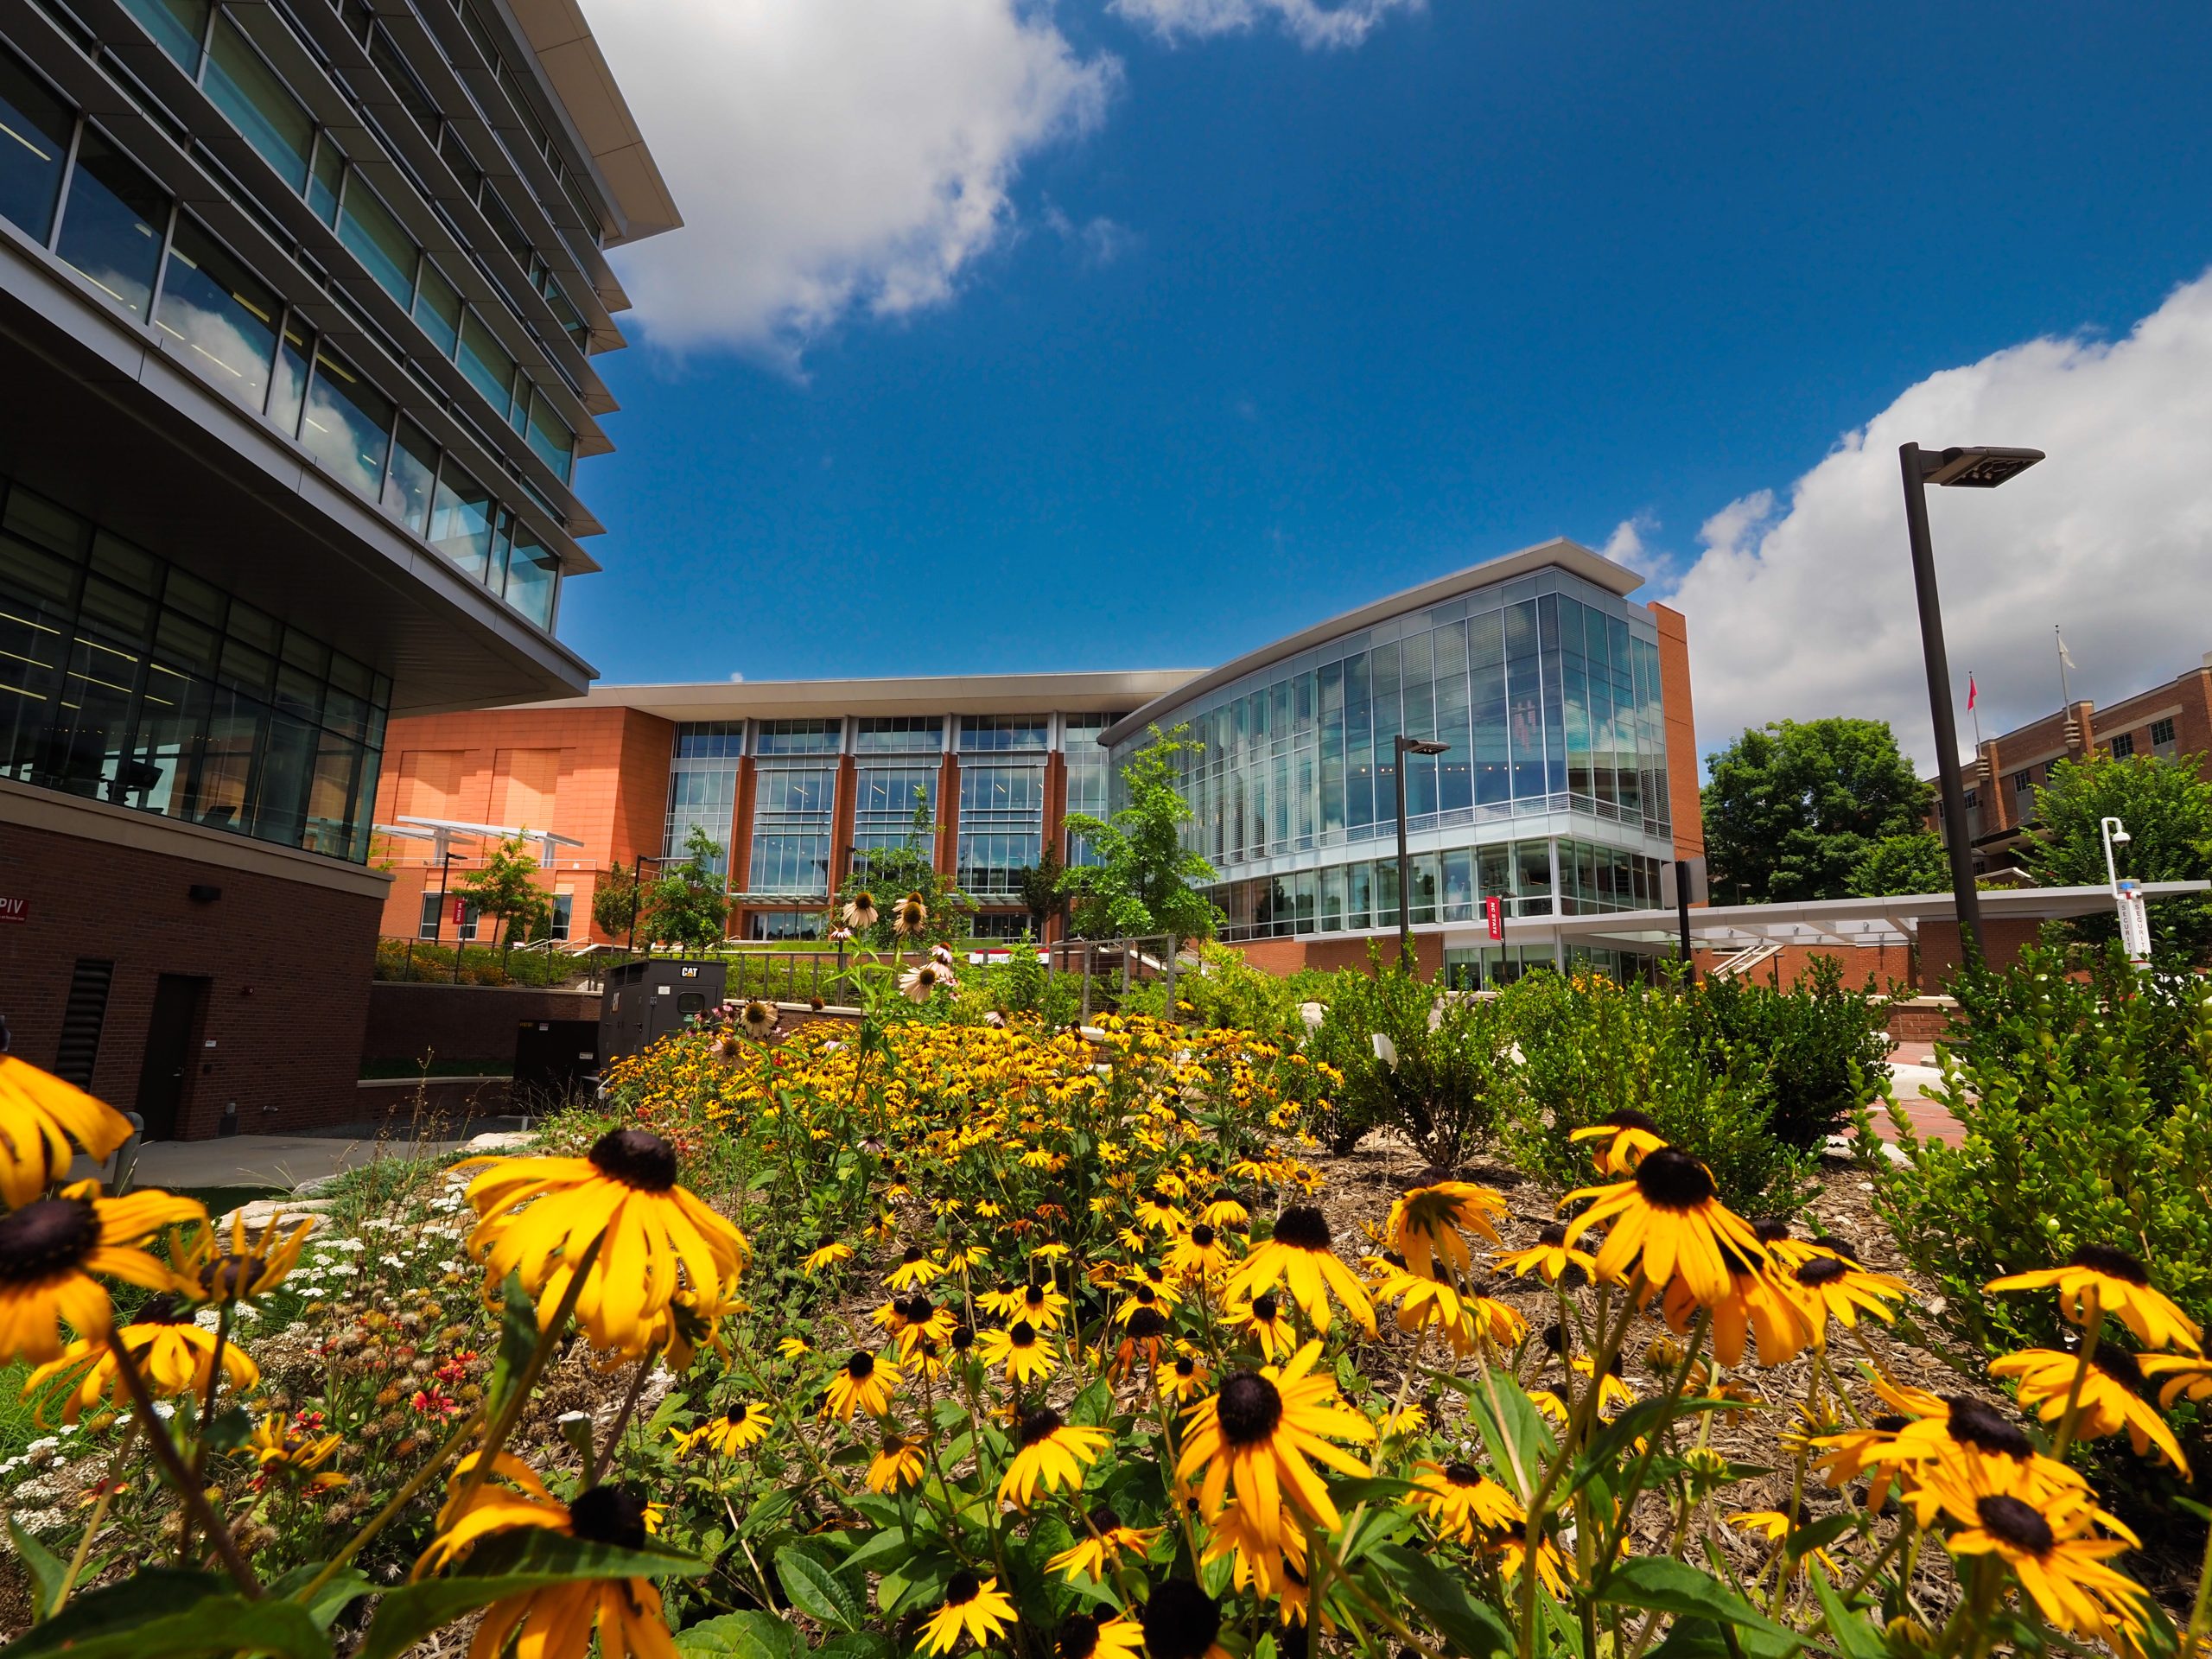 NC State's Talley Student Union is framed by summer flowers. Photo by Marc Hall